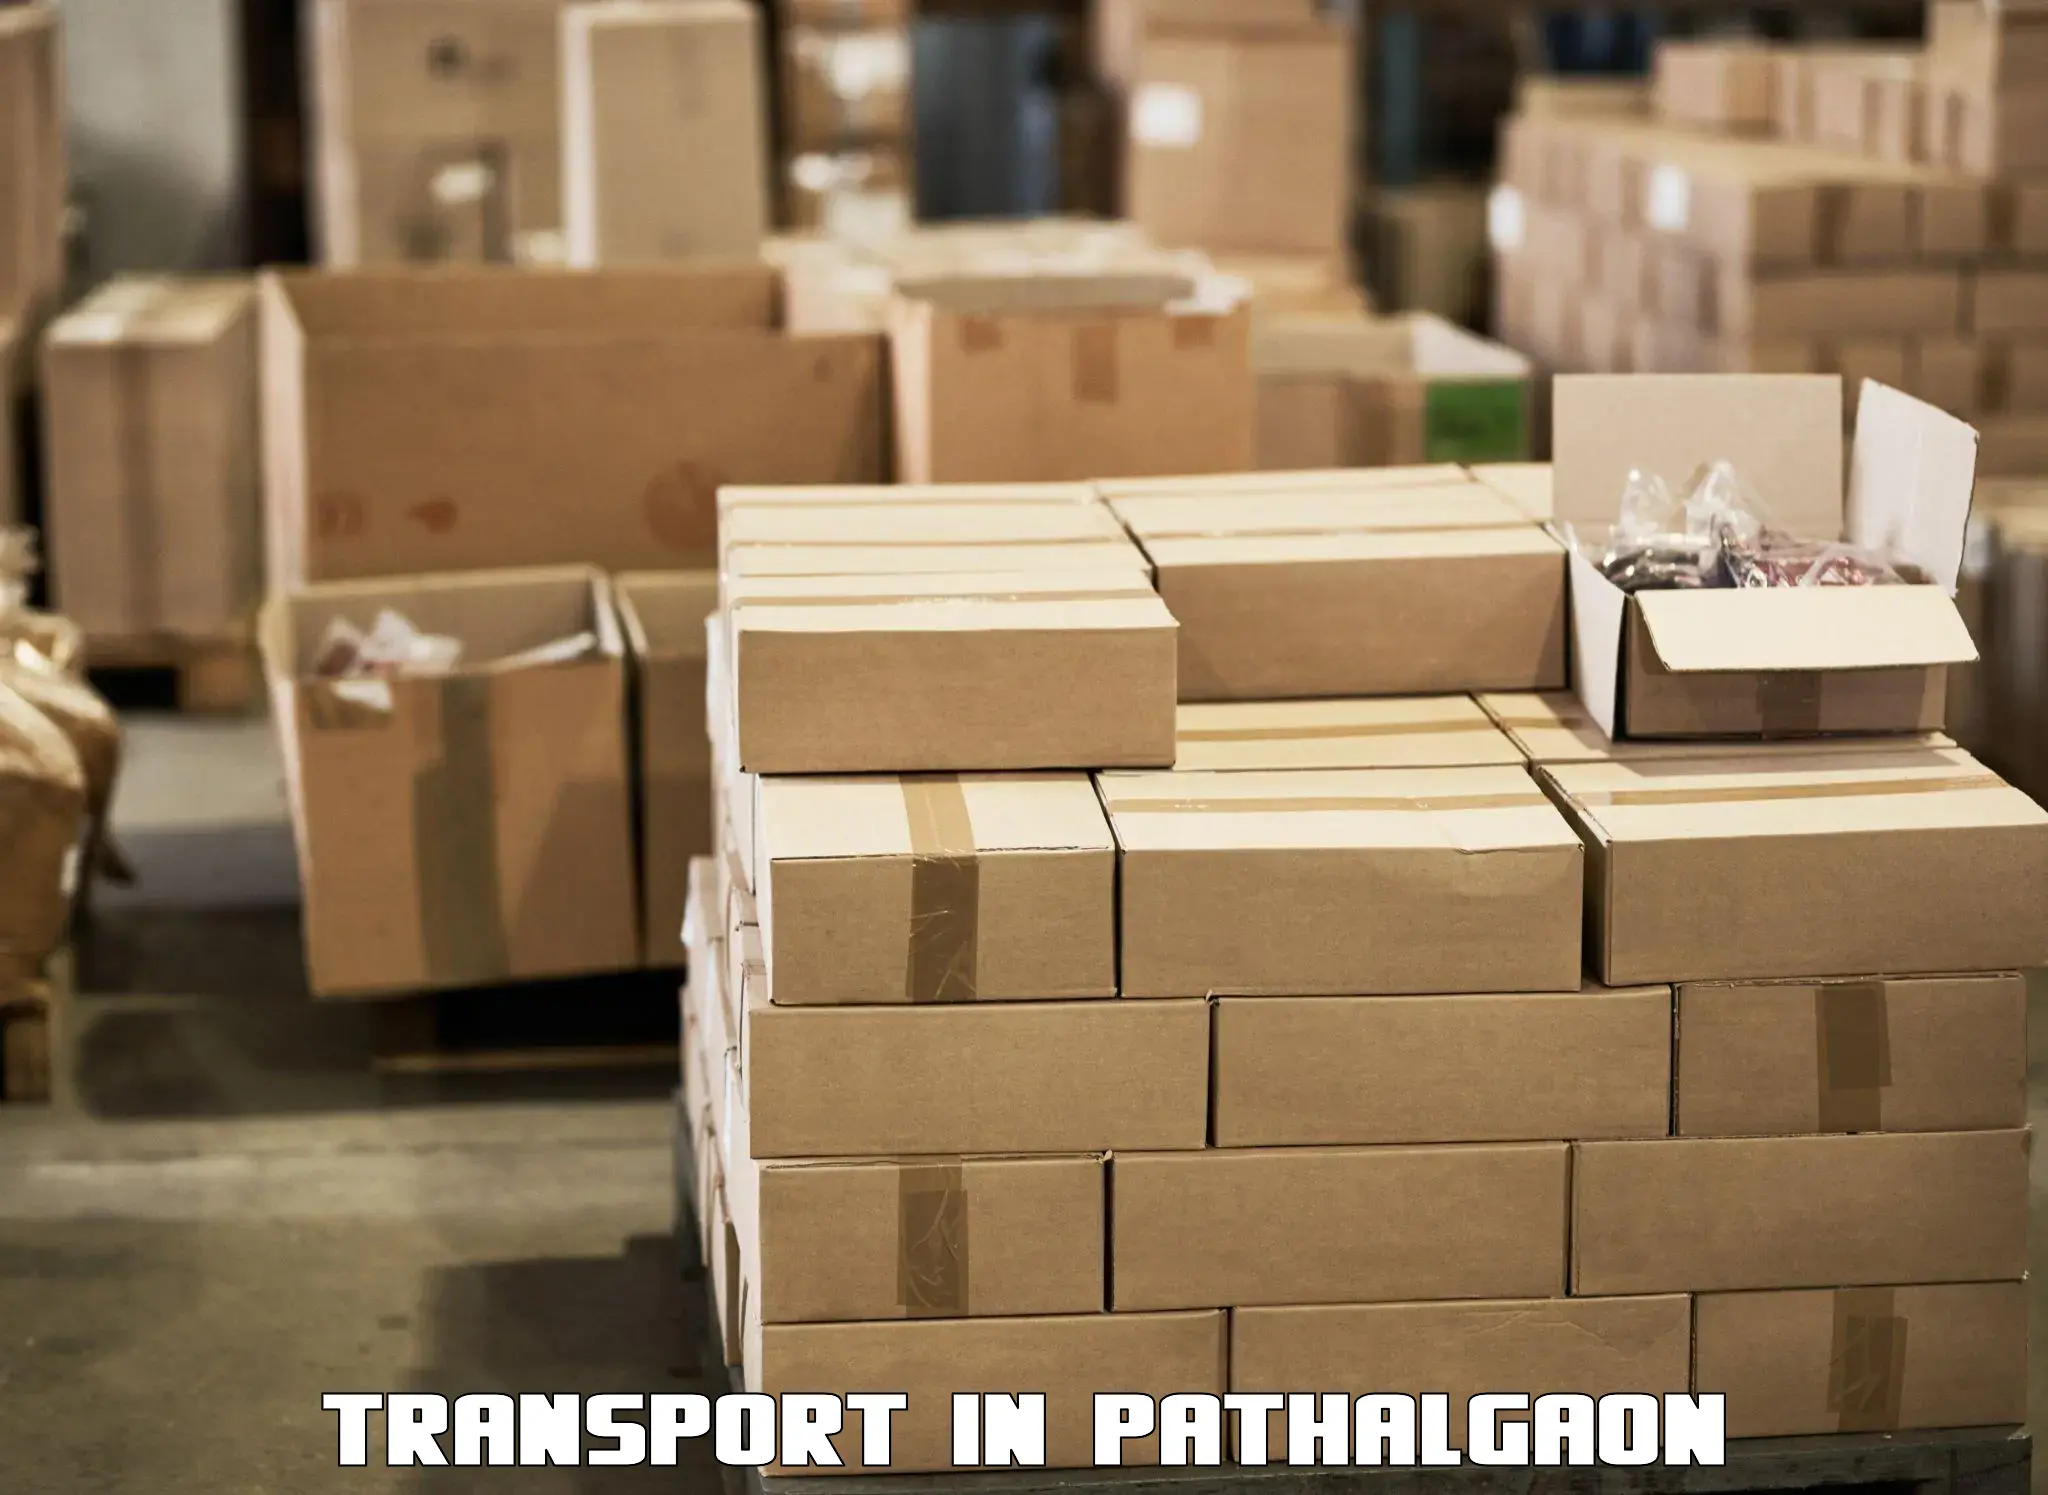 Truck transport companies in India in Pathalgaon